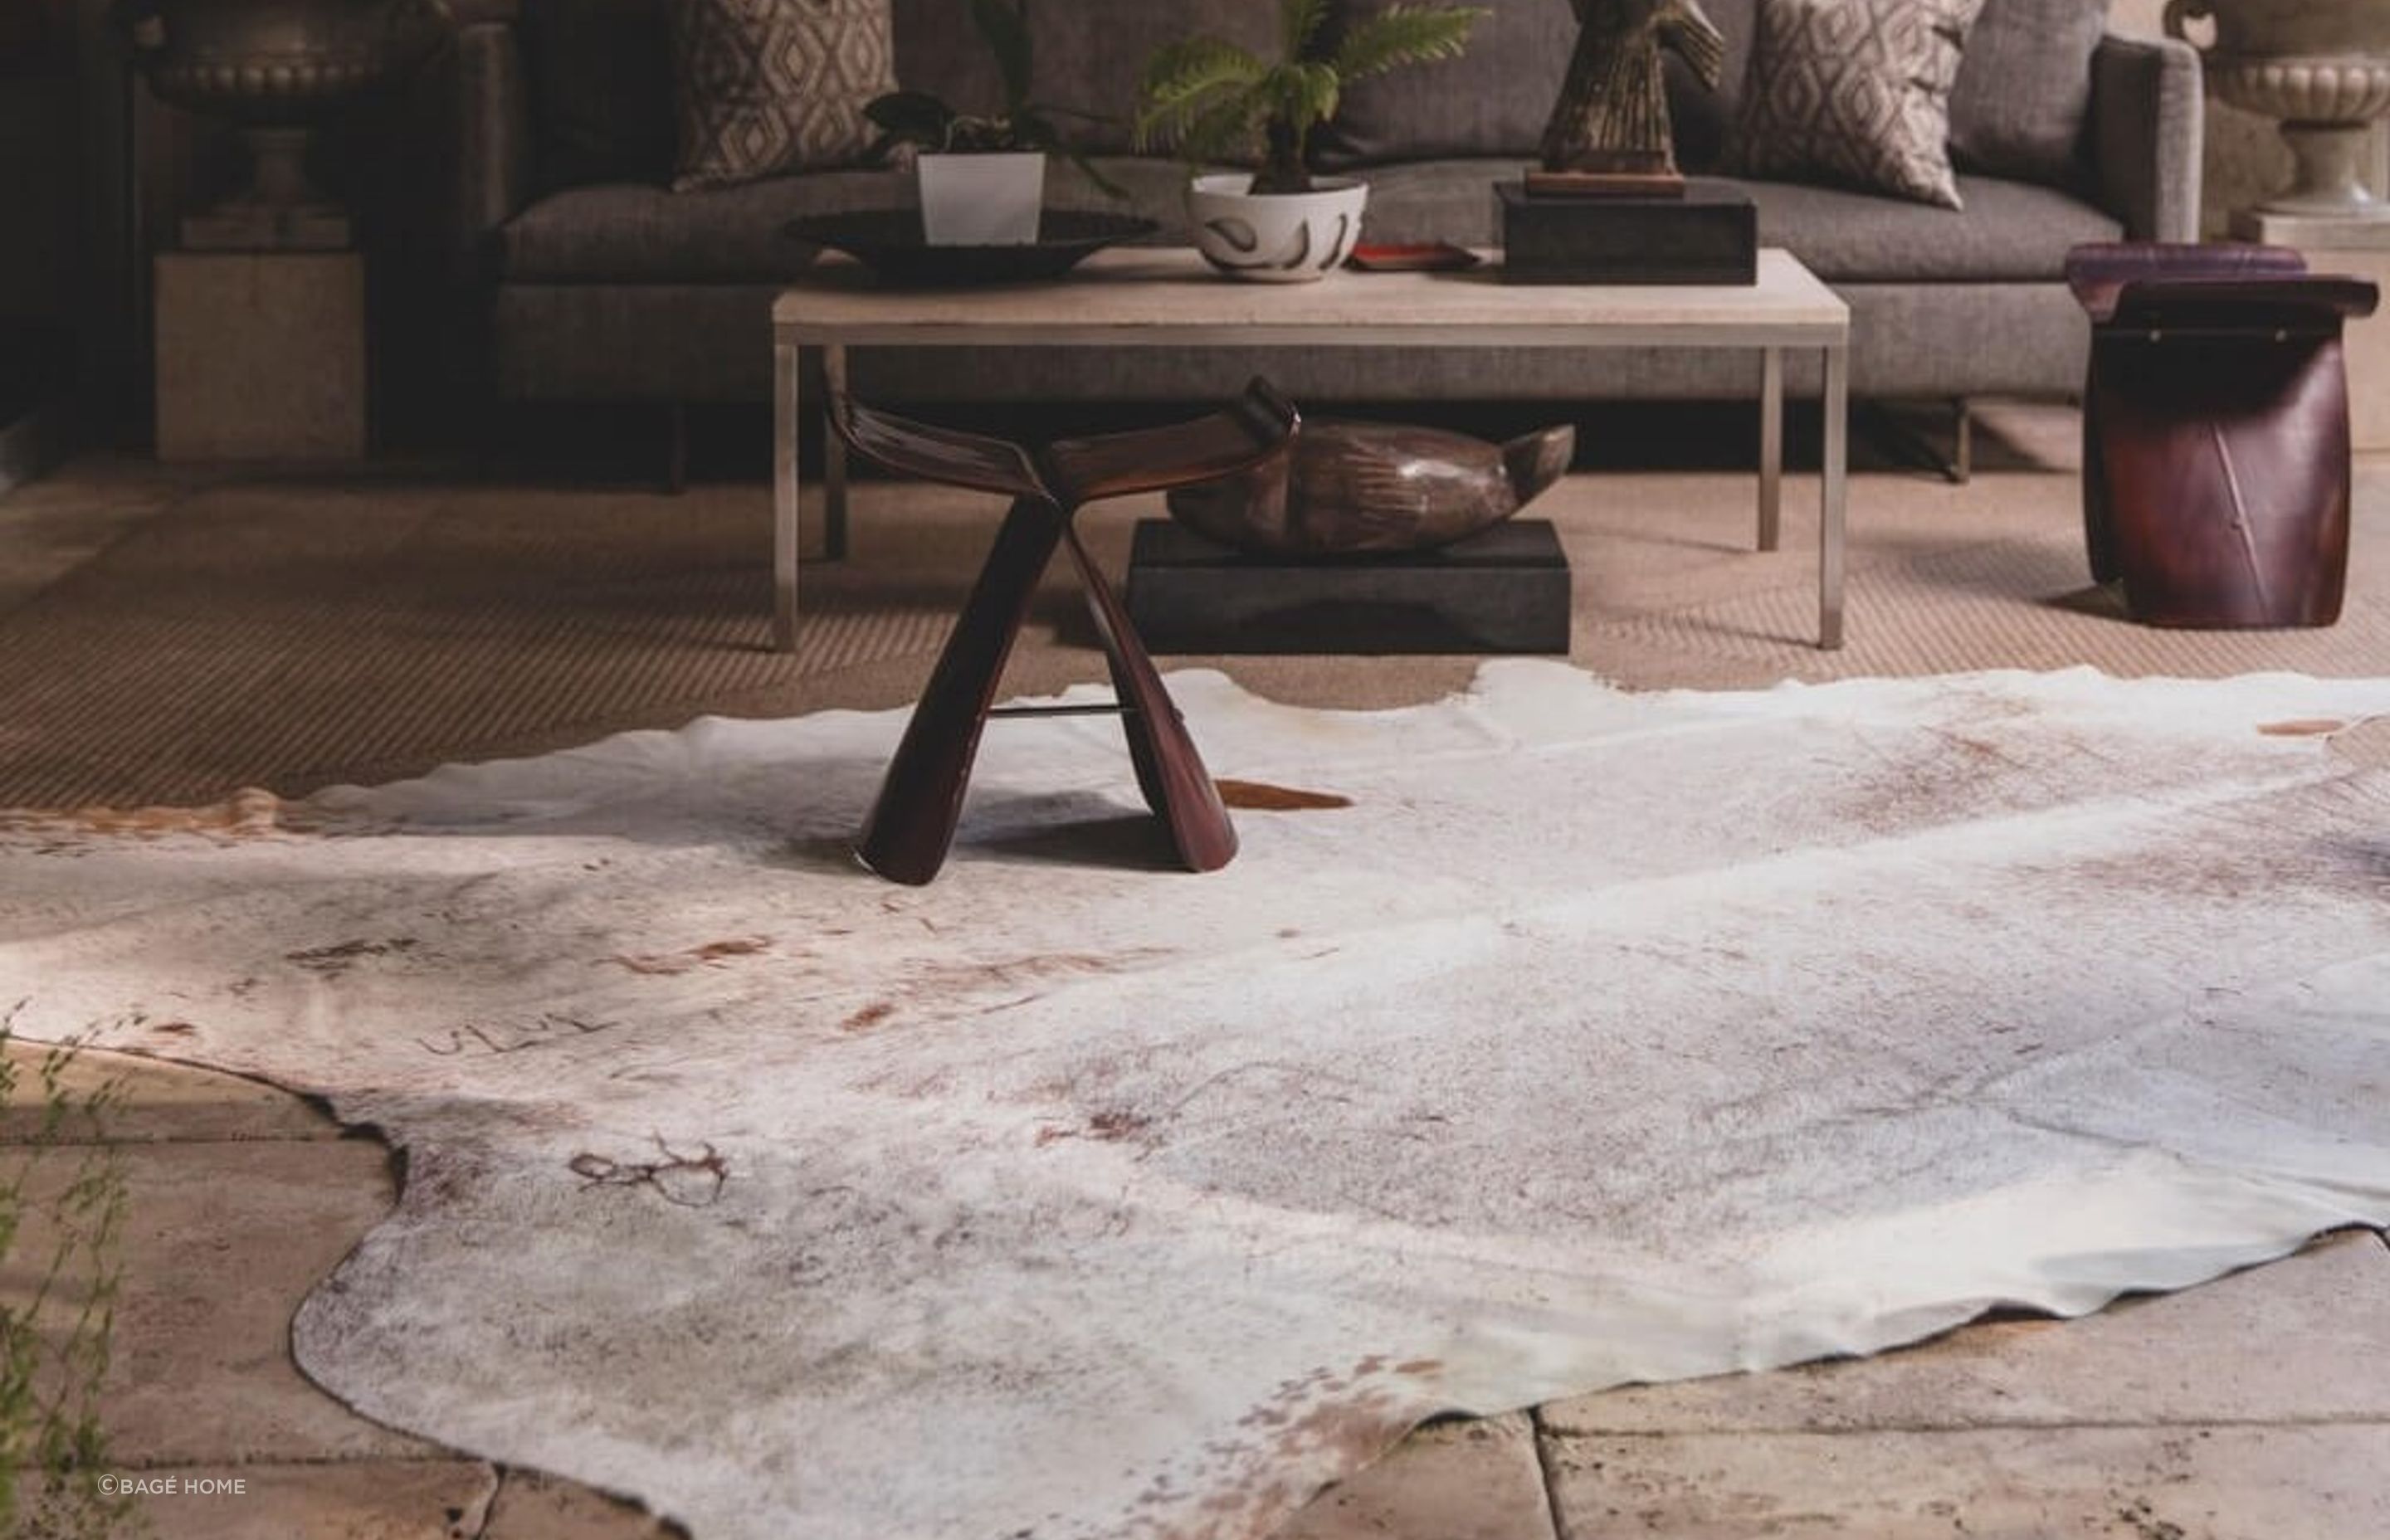 You can make quite the statement with an option like the Speckled Vintage Whites Cowhide Rug